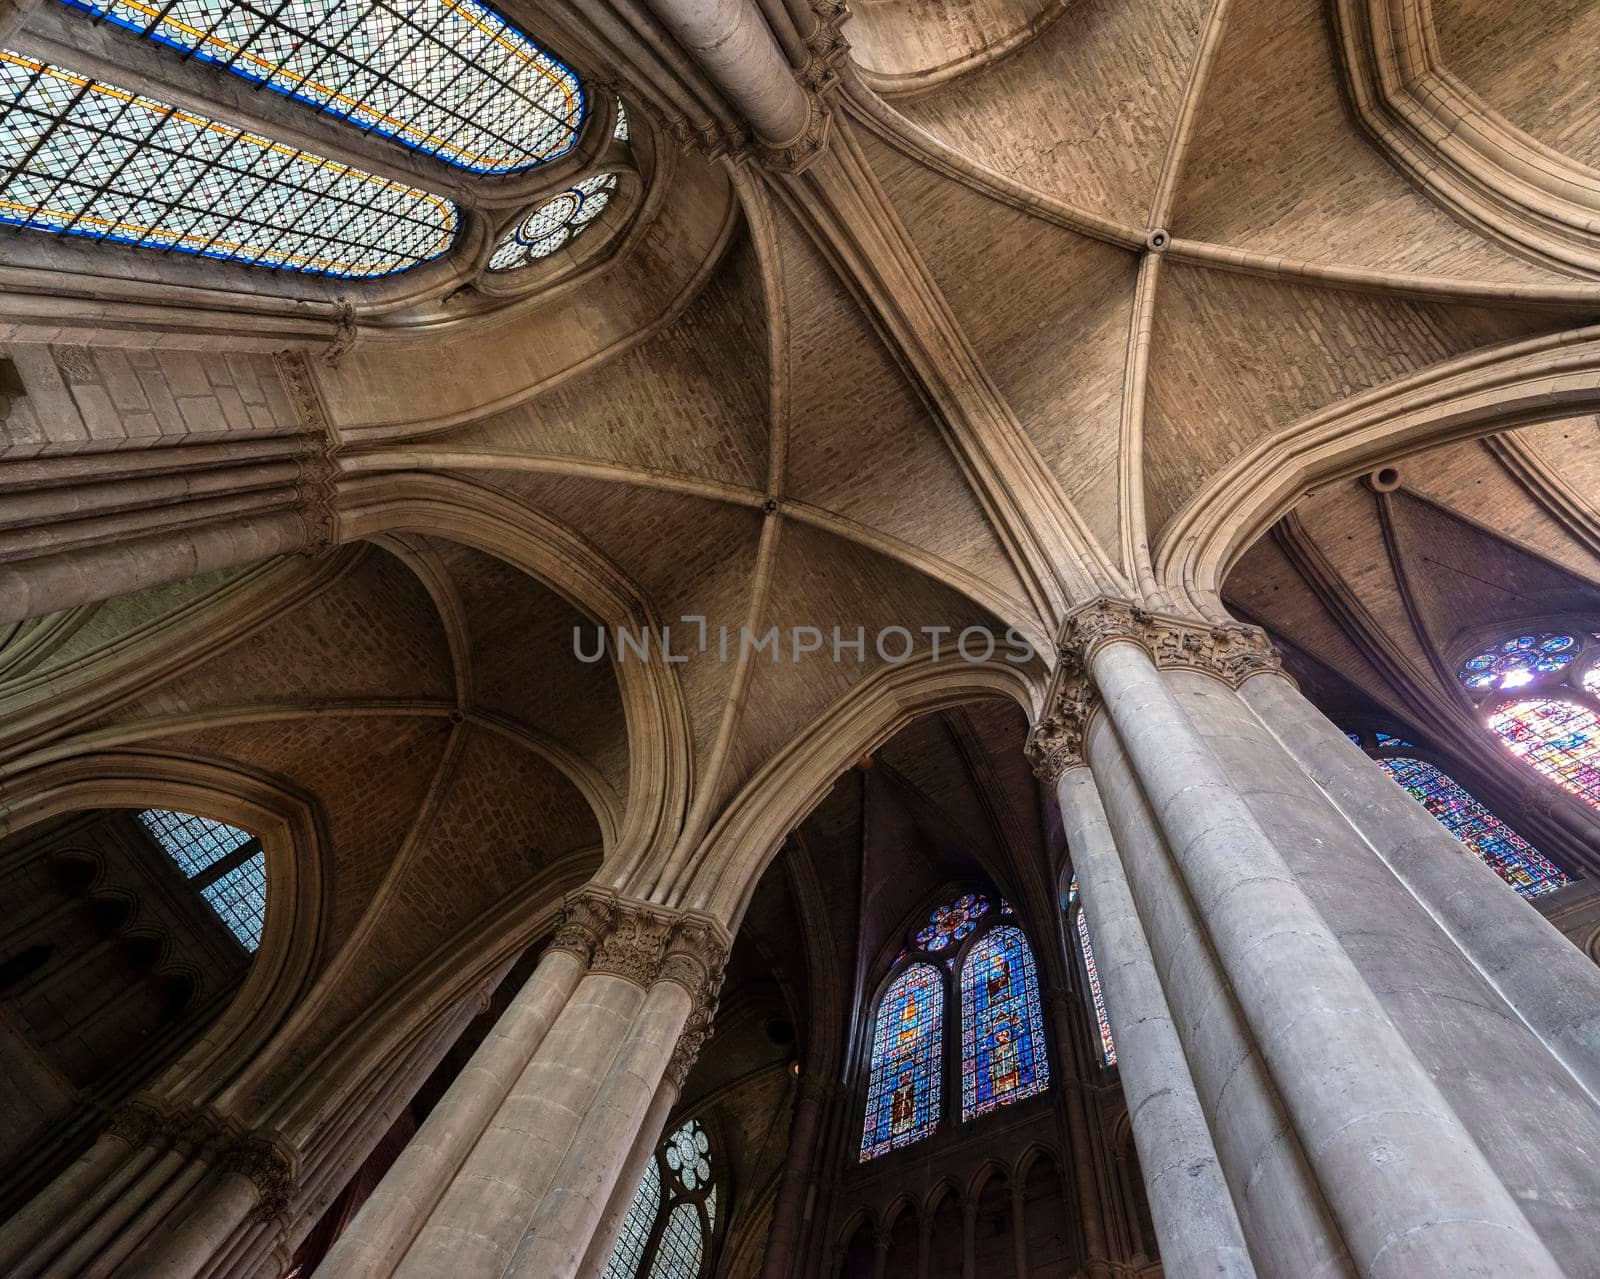 vaults and stained glass windows inside cathedral of reims in the north of france by ahavelaar